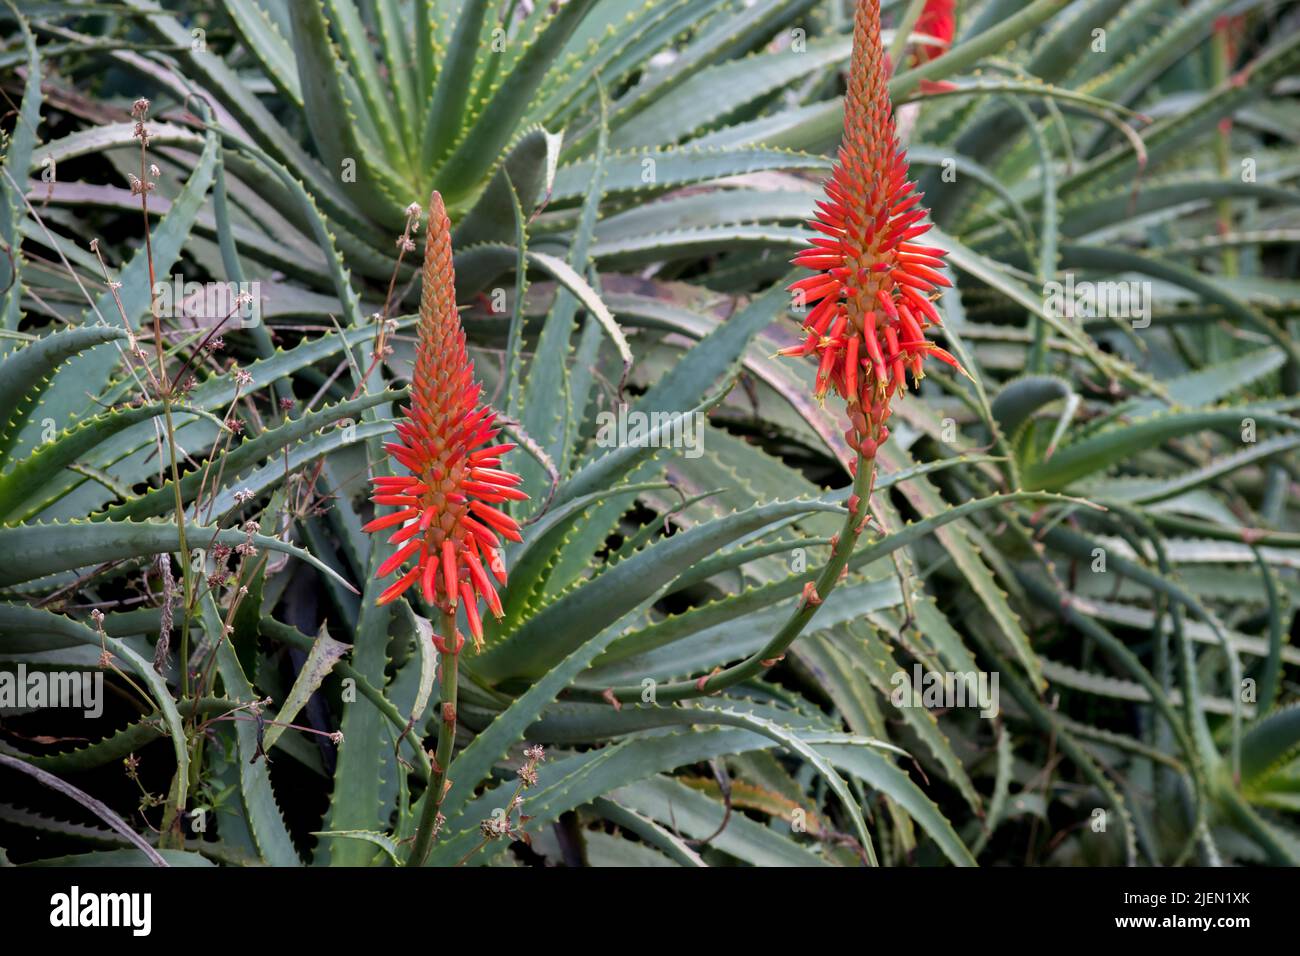 showy red flowers of an Aloe arborescens Stock Photo